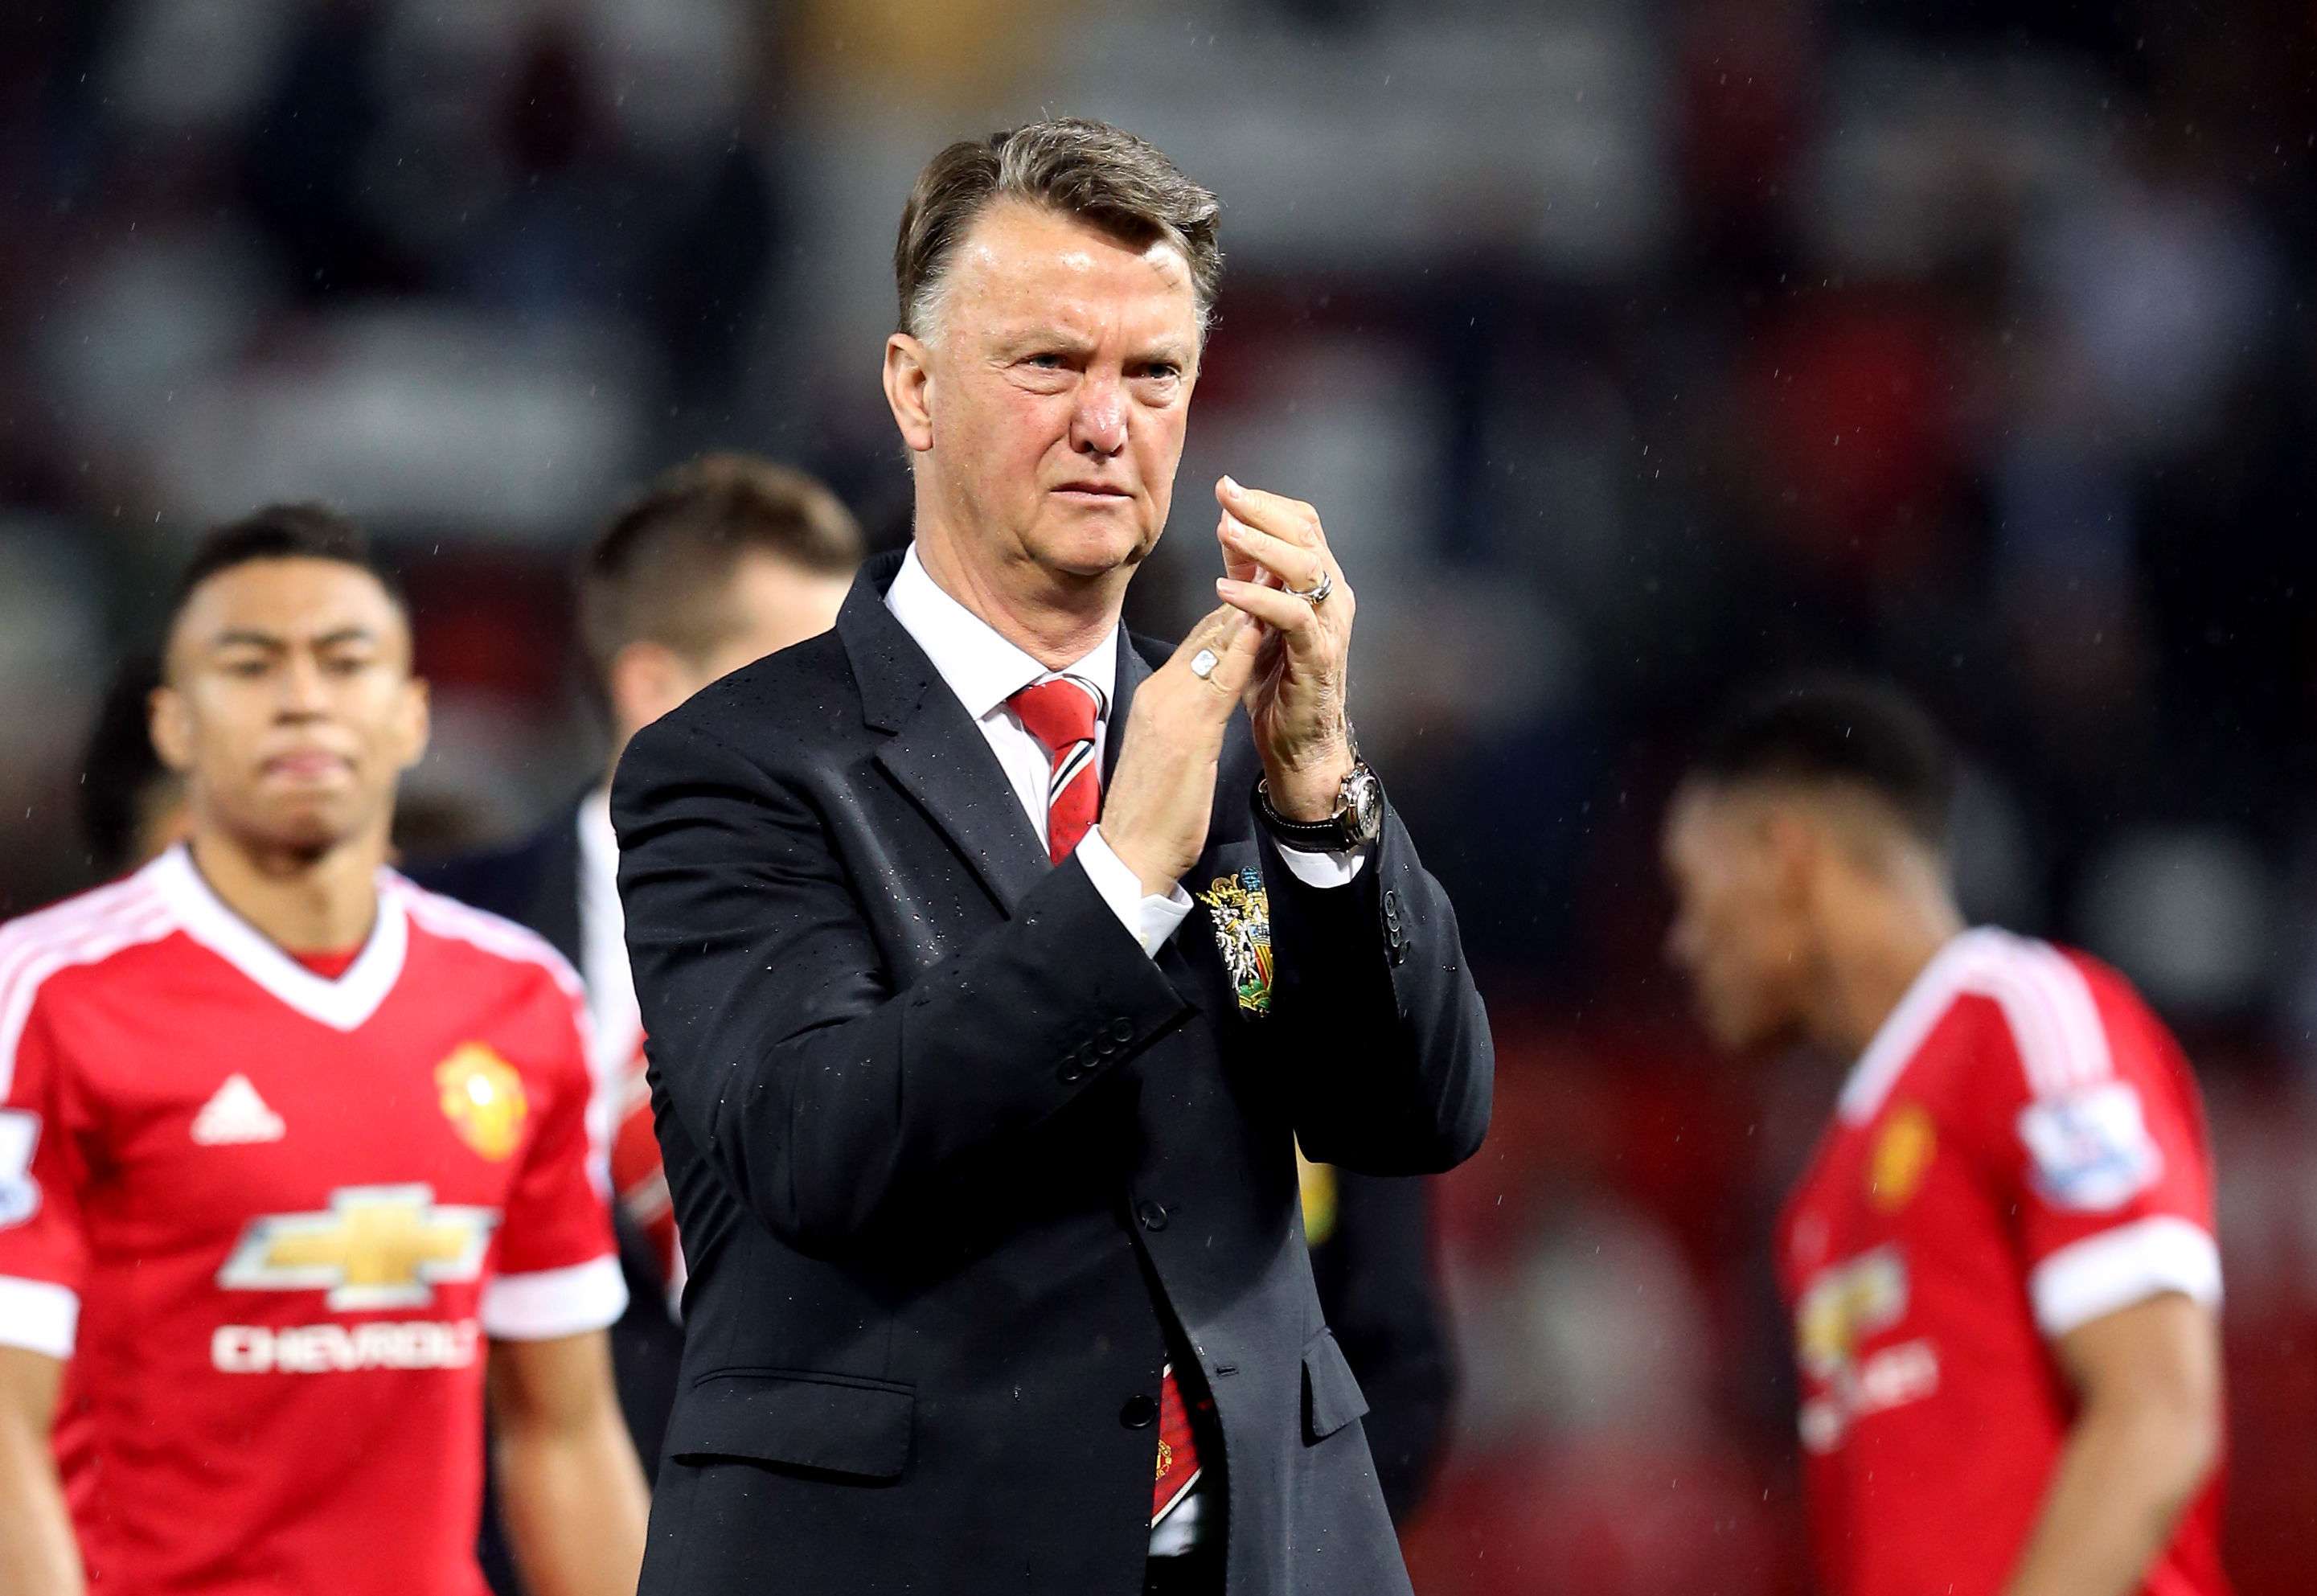 Louis van Gaal was in typically defiant mood after Manchester United finished fifth in the Premier League. Photo: AP